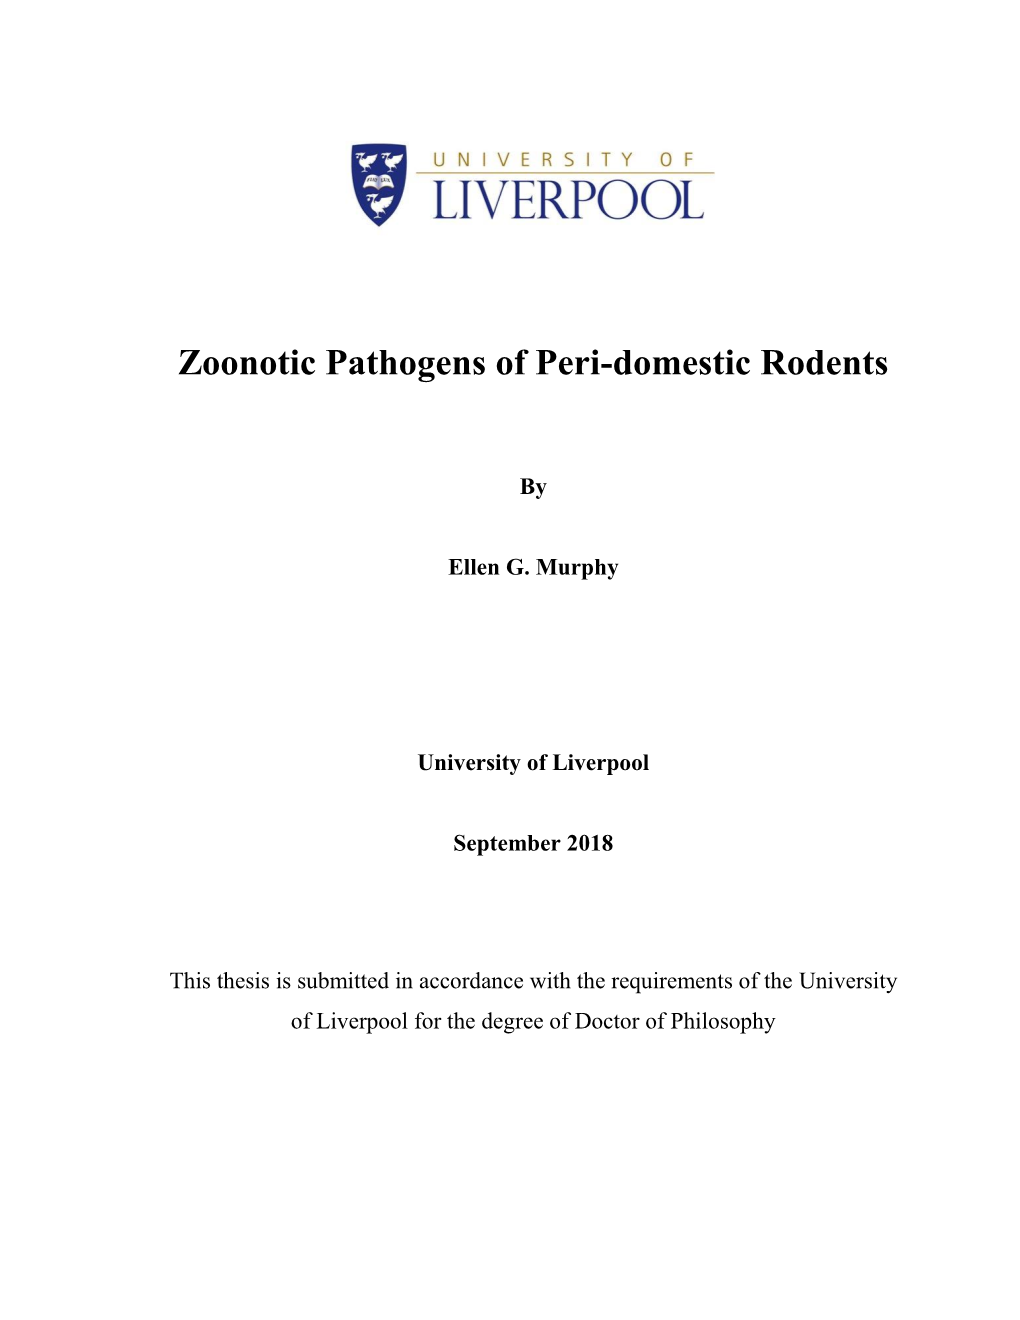 Zoonotic Pathogens of Peri-Domestic Rodents